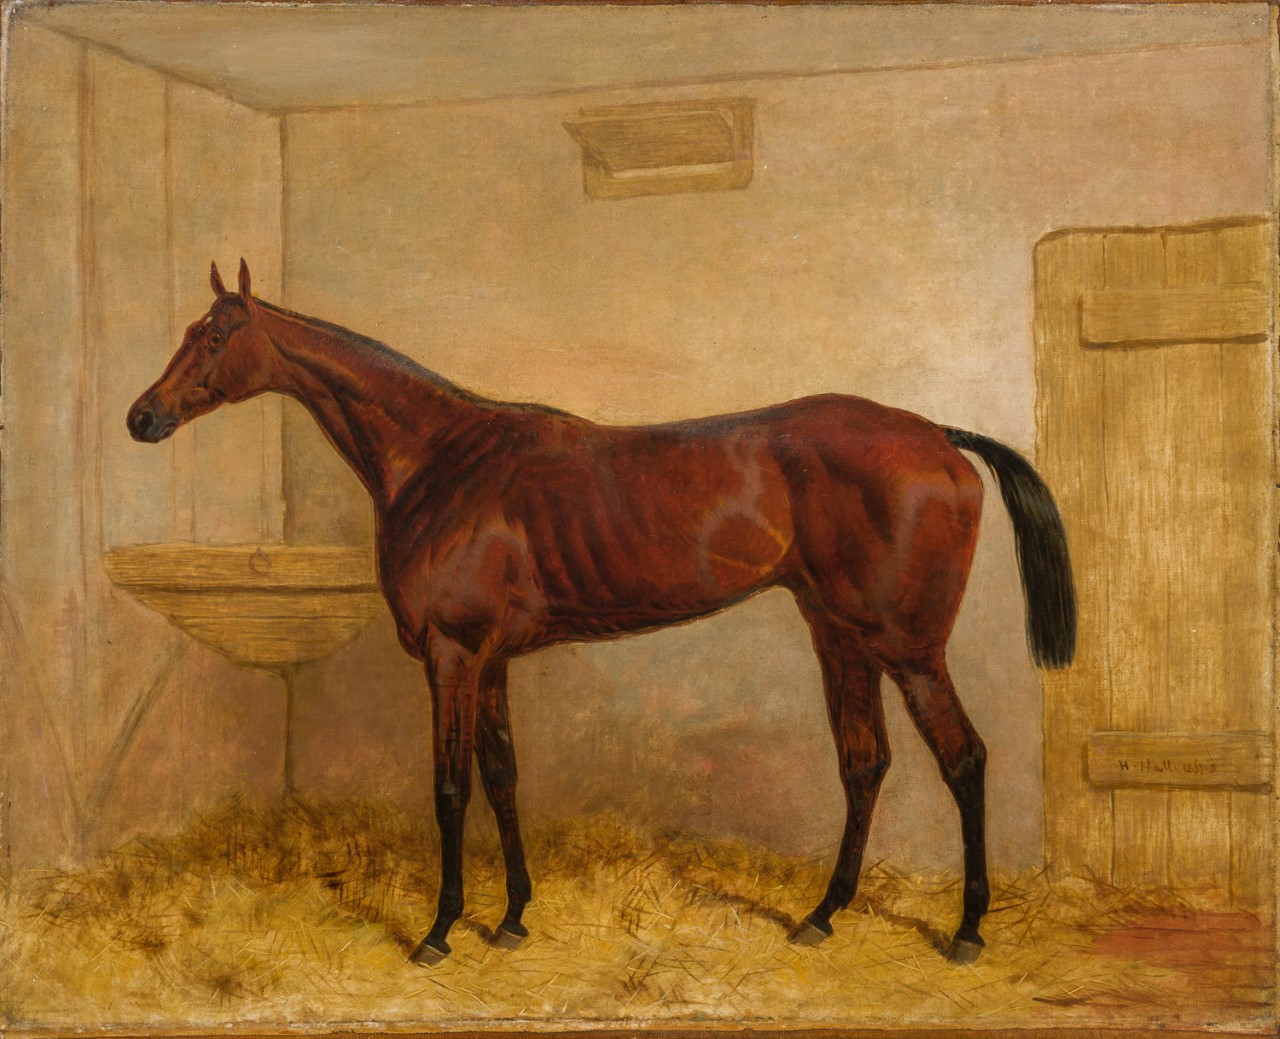 Coming under the hammer: Harry Hall’s 1867 oil-on-canvas painting of famed French champion Gladiateur